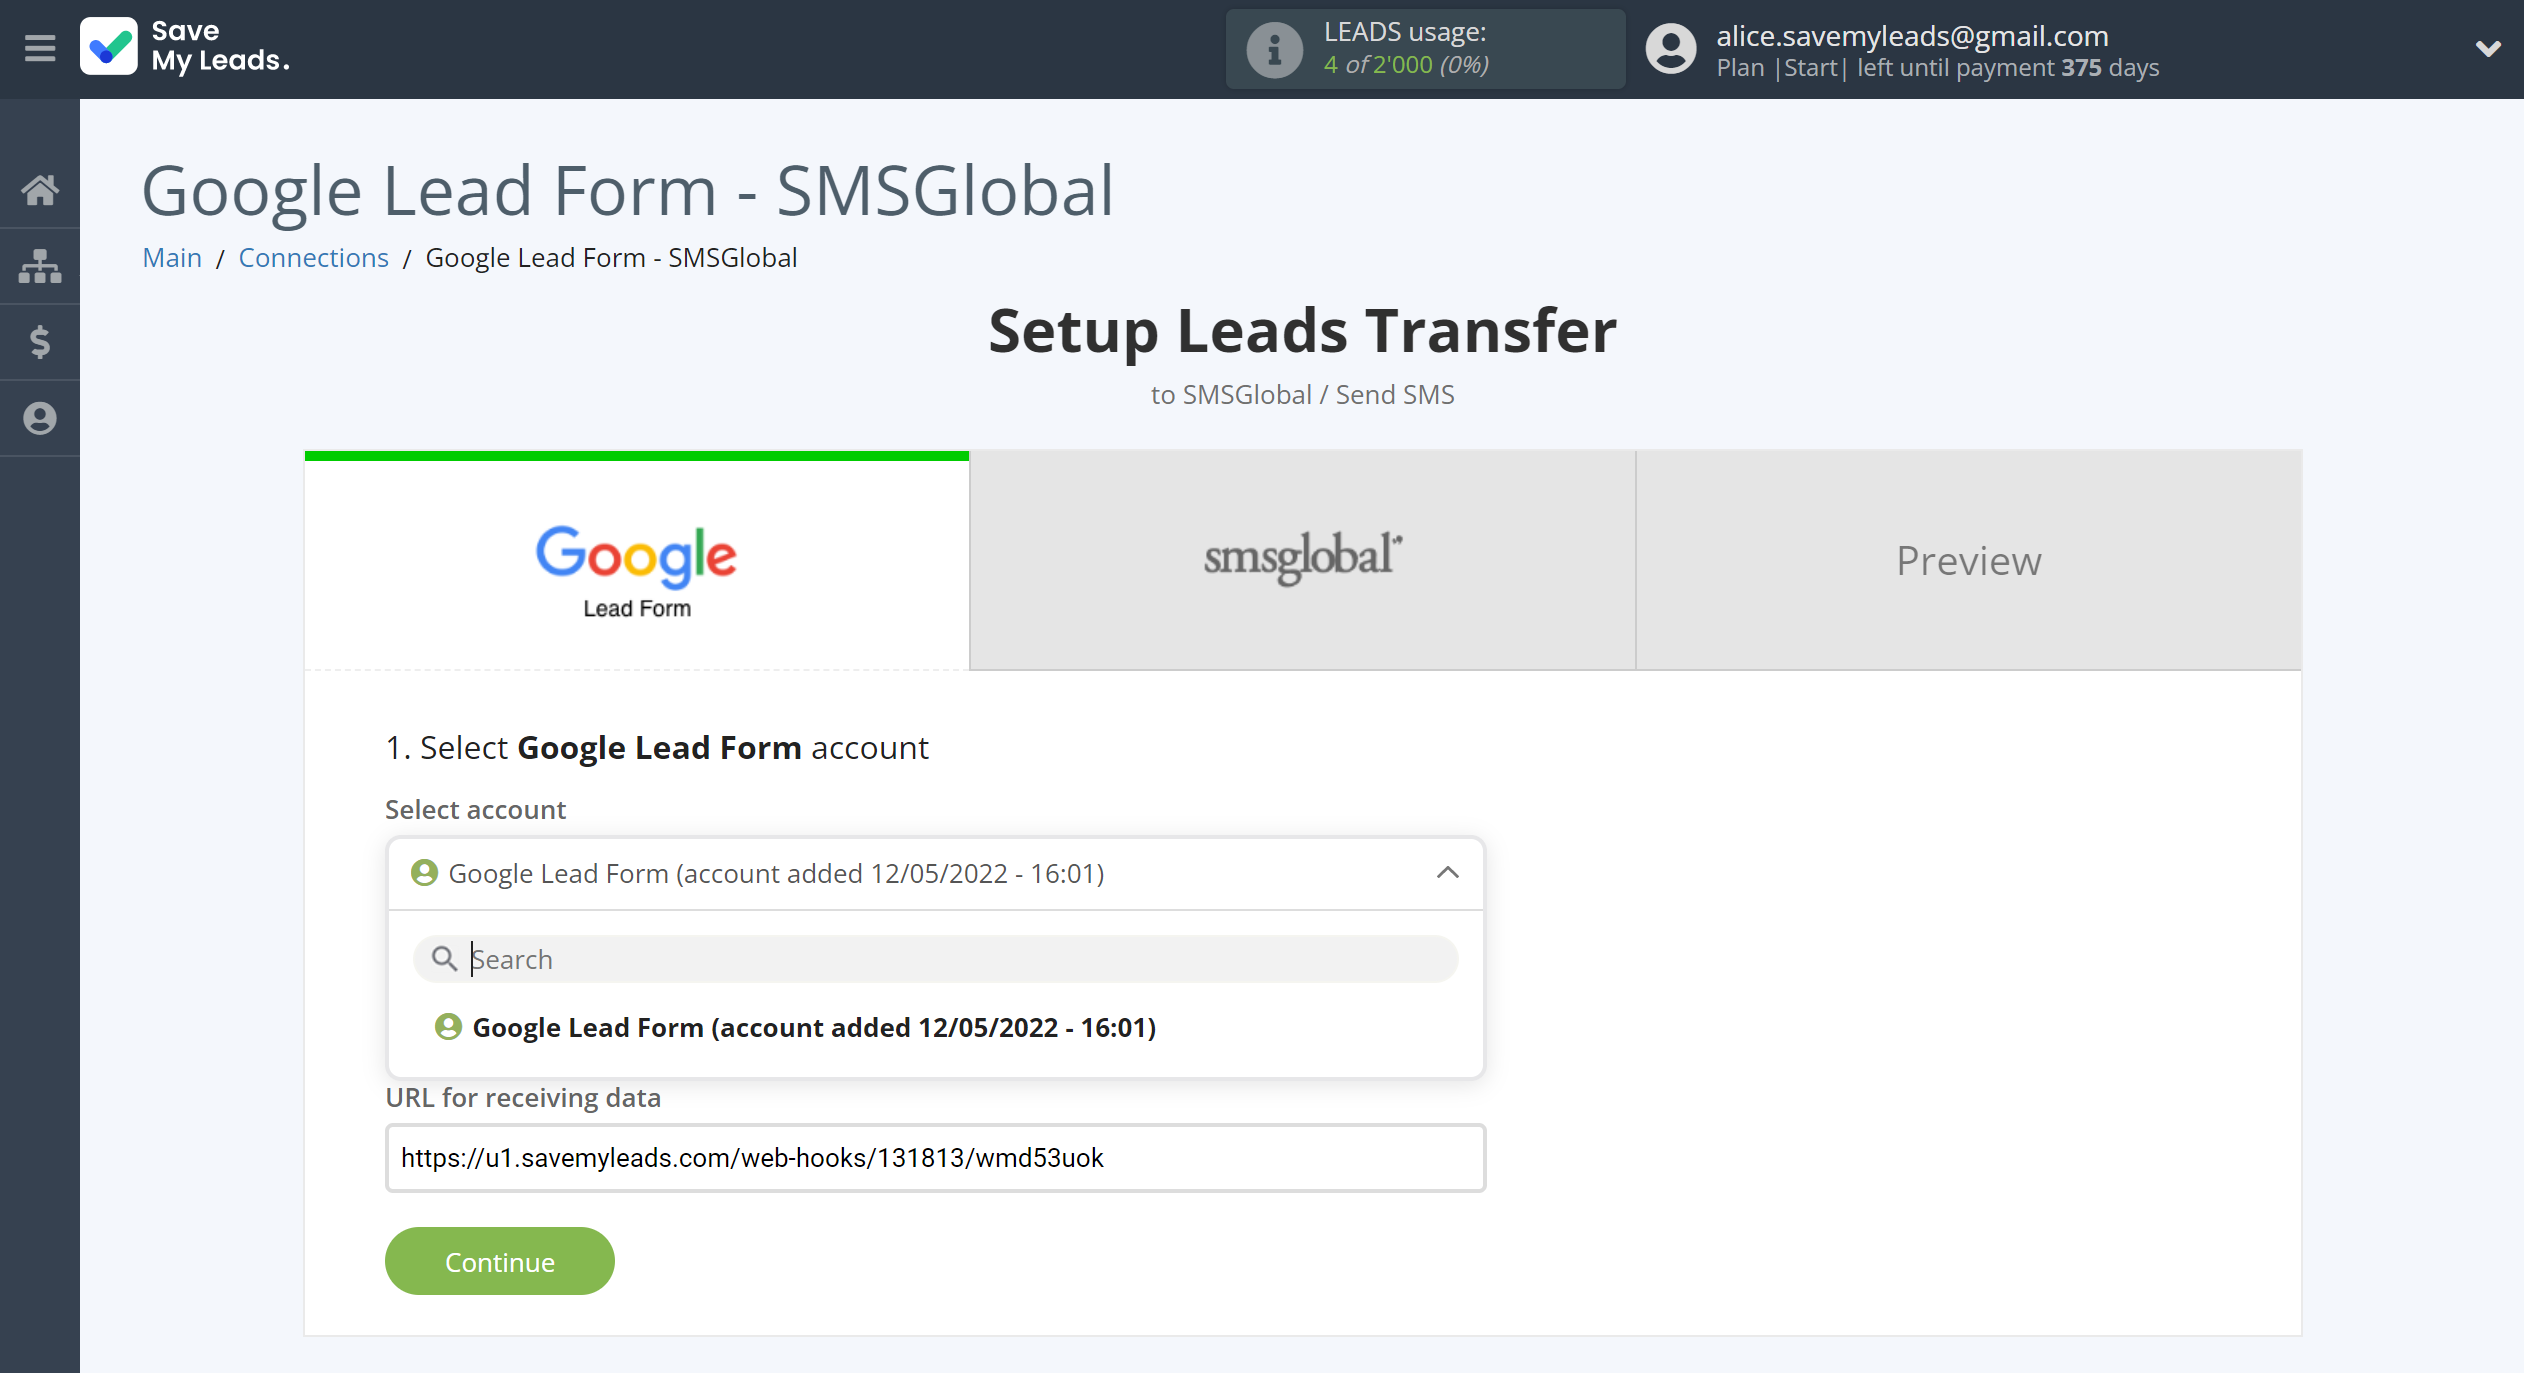 How to Connect Google Lead Form with SMSGlobal | Data Source account selection